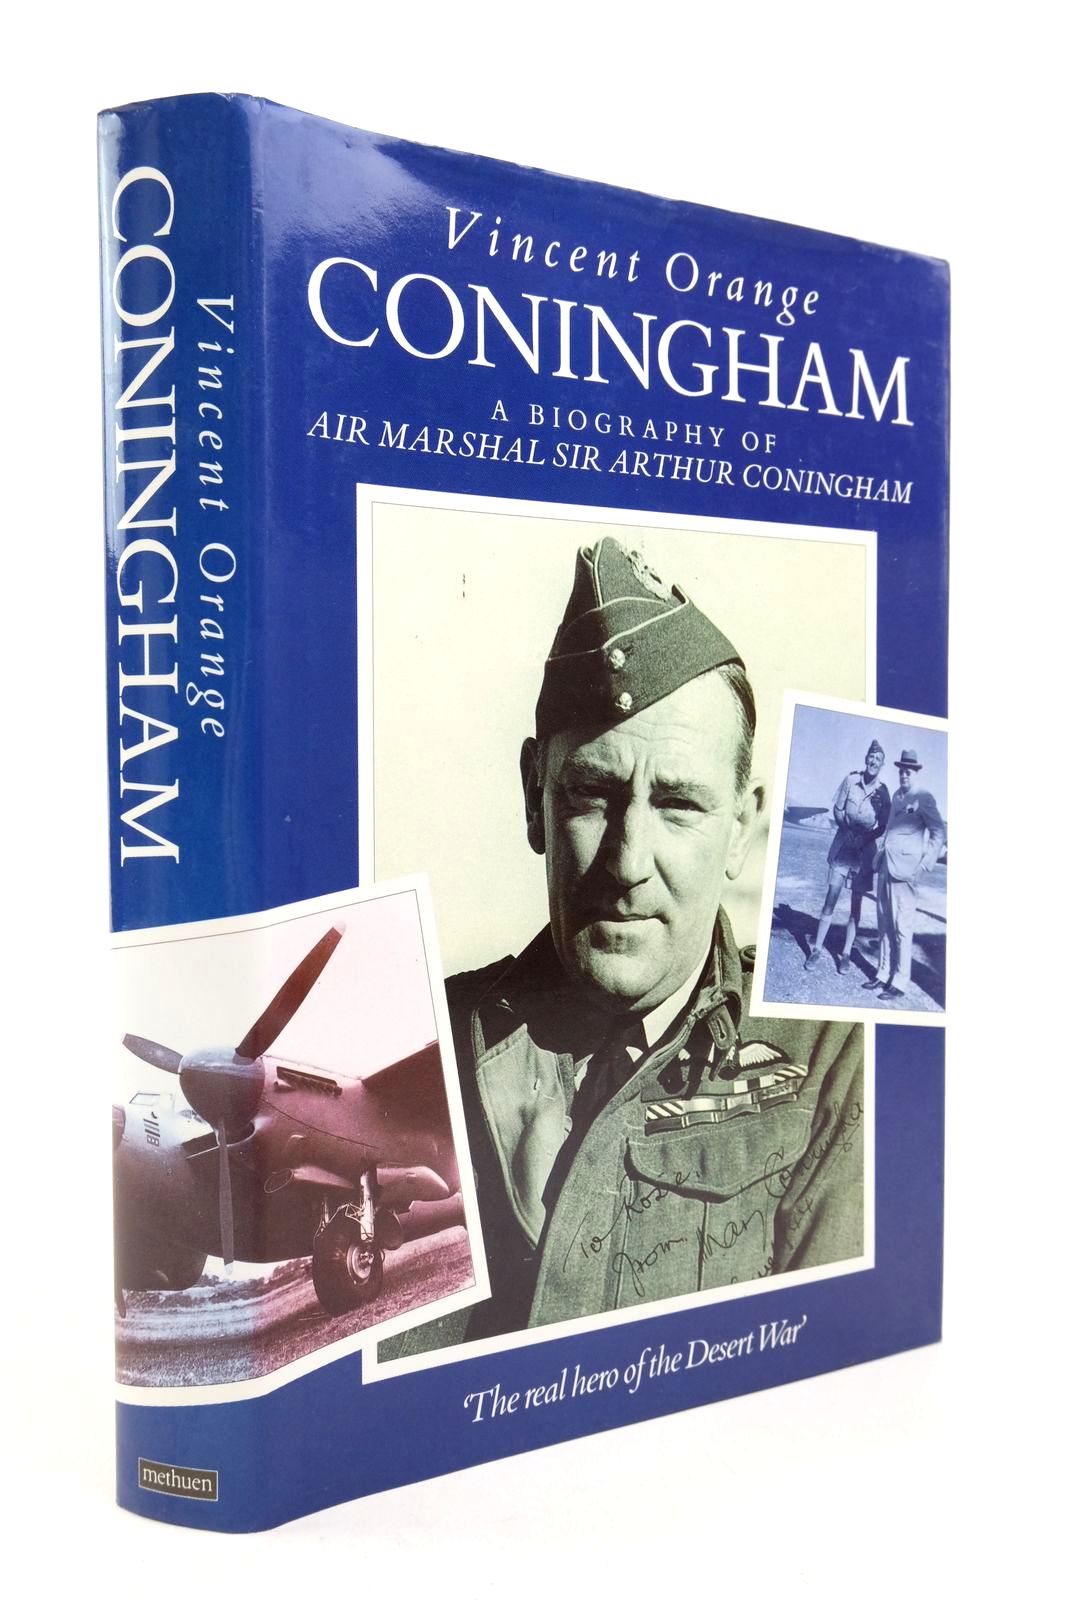 Photo of CONINGHAM A BIOGRAPHY OF AIR MARSHAL SIR ARTHUR CONINGHAM written by Orange, Vincent published by Methuen (STOCK CODE: 2139802)  for sale by Stella & Rose's Books